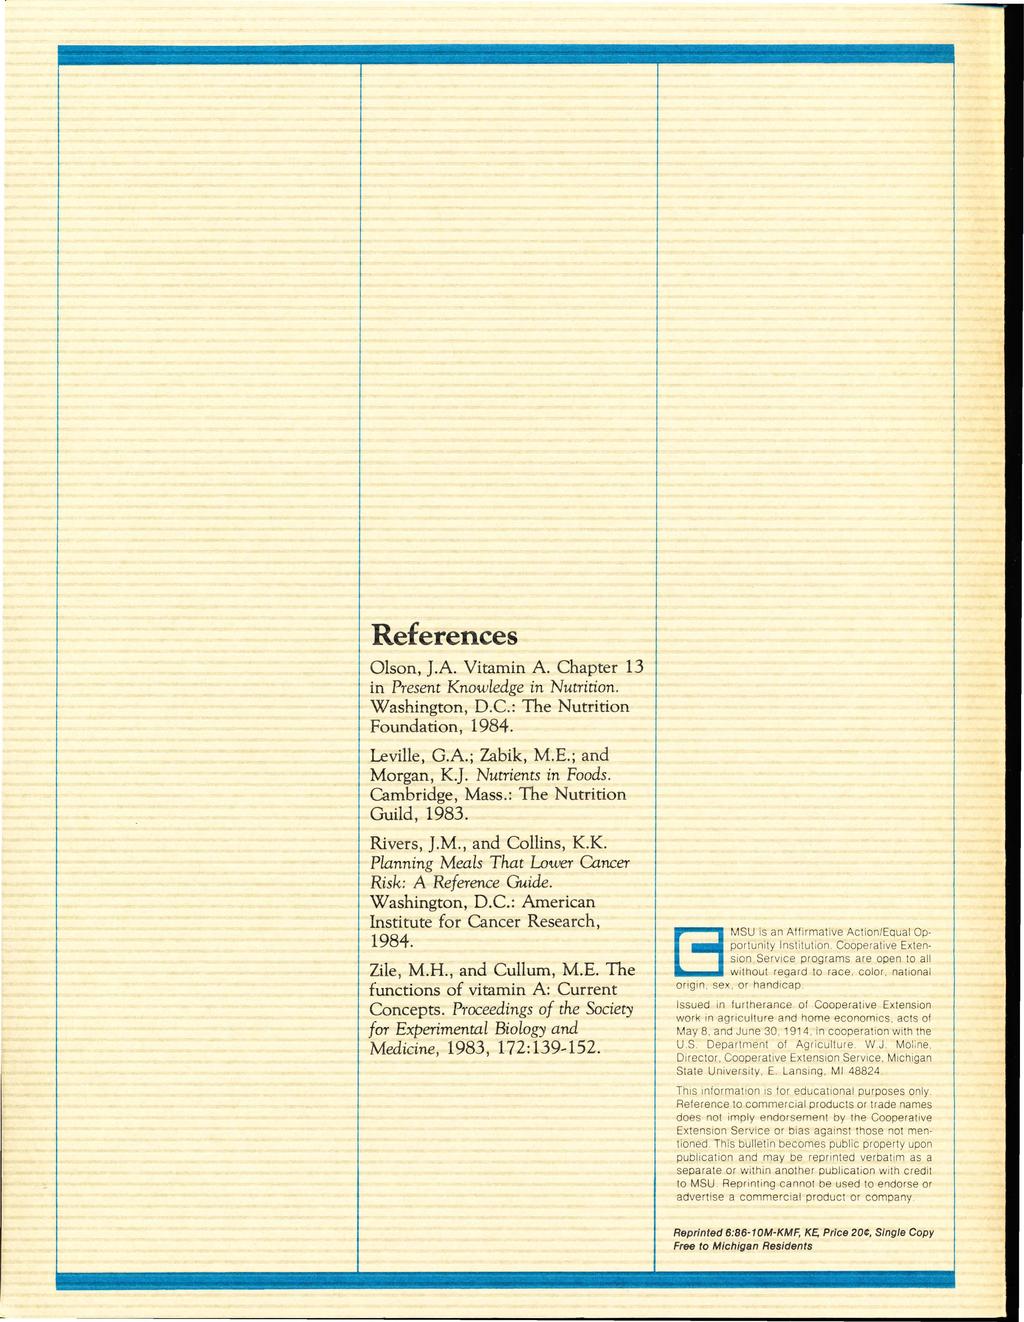 _...,... References Olson, ].A. Vitamin A. Chapter 13 in Present Knowledge in Nutrition. Washington, D.C.: The Nutrition Foundation, 1984. Leville, G.A.; Zabik, M.E.; and Morgan, K.]. Nutrients in Foods.